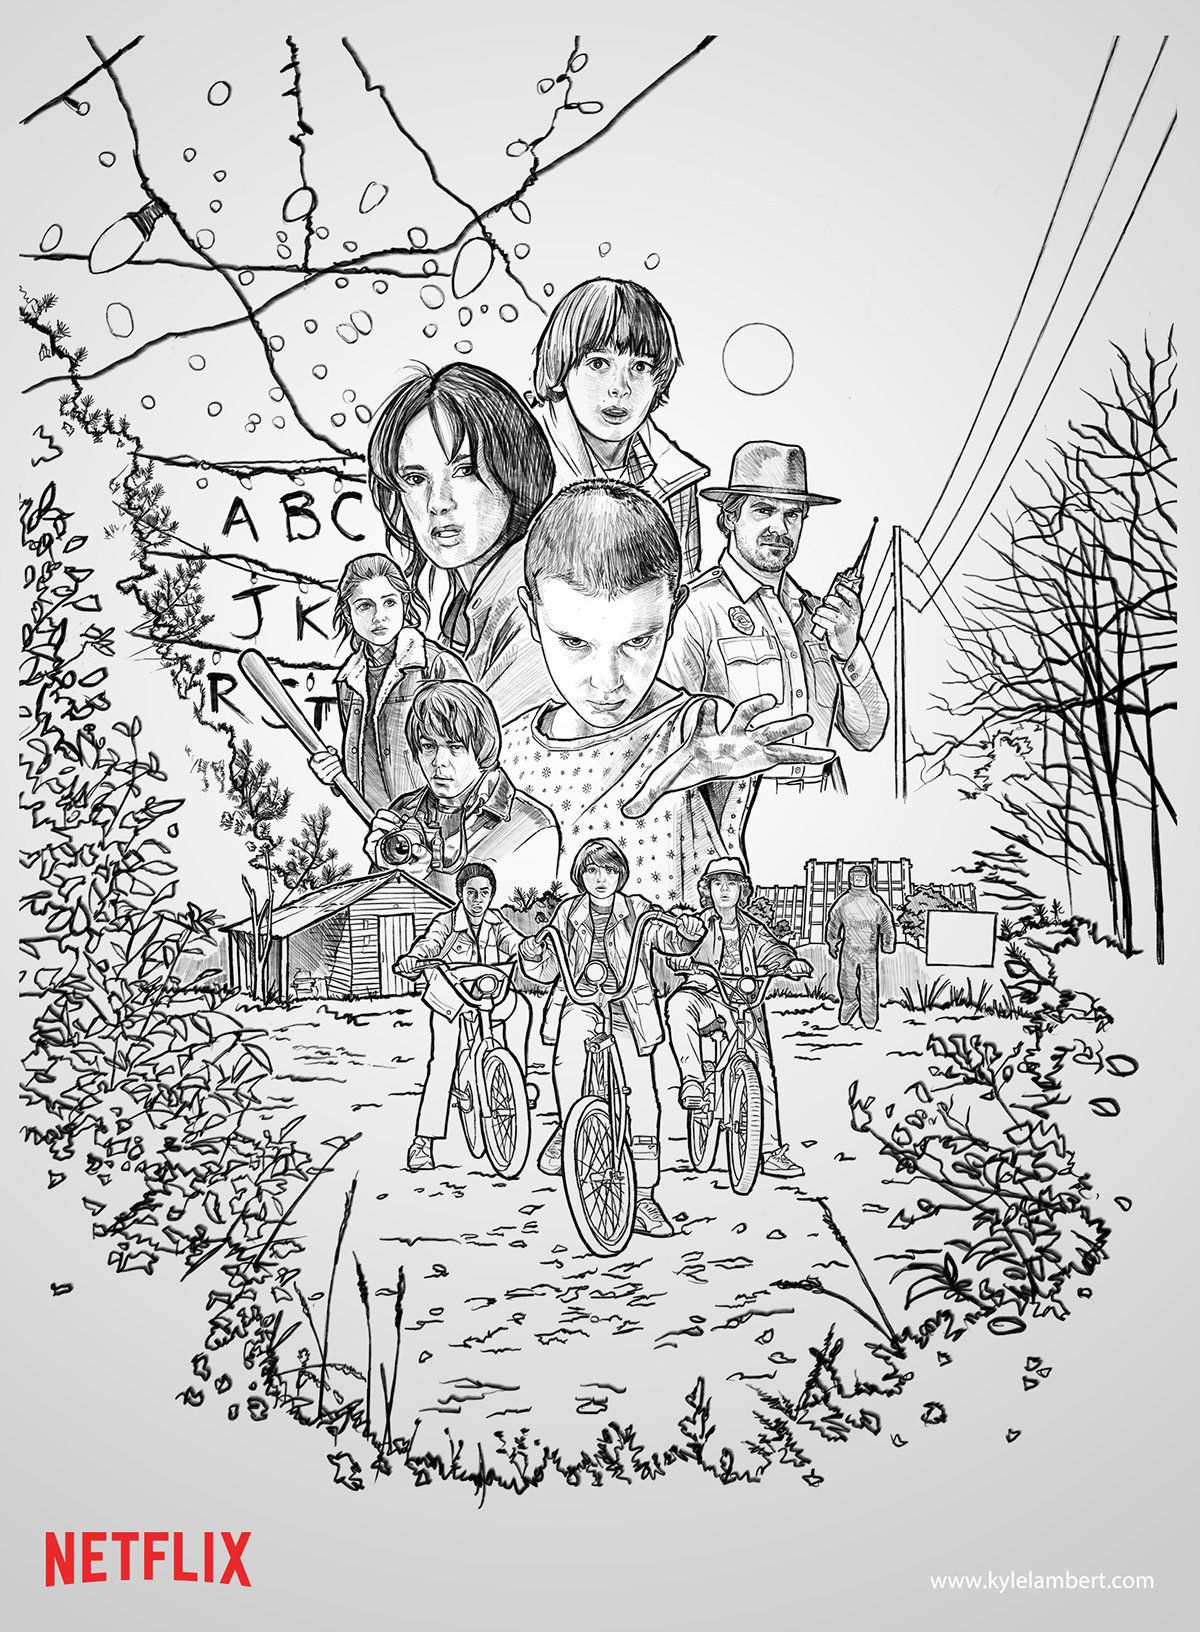 The hand-drawn sketch before color was added.